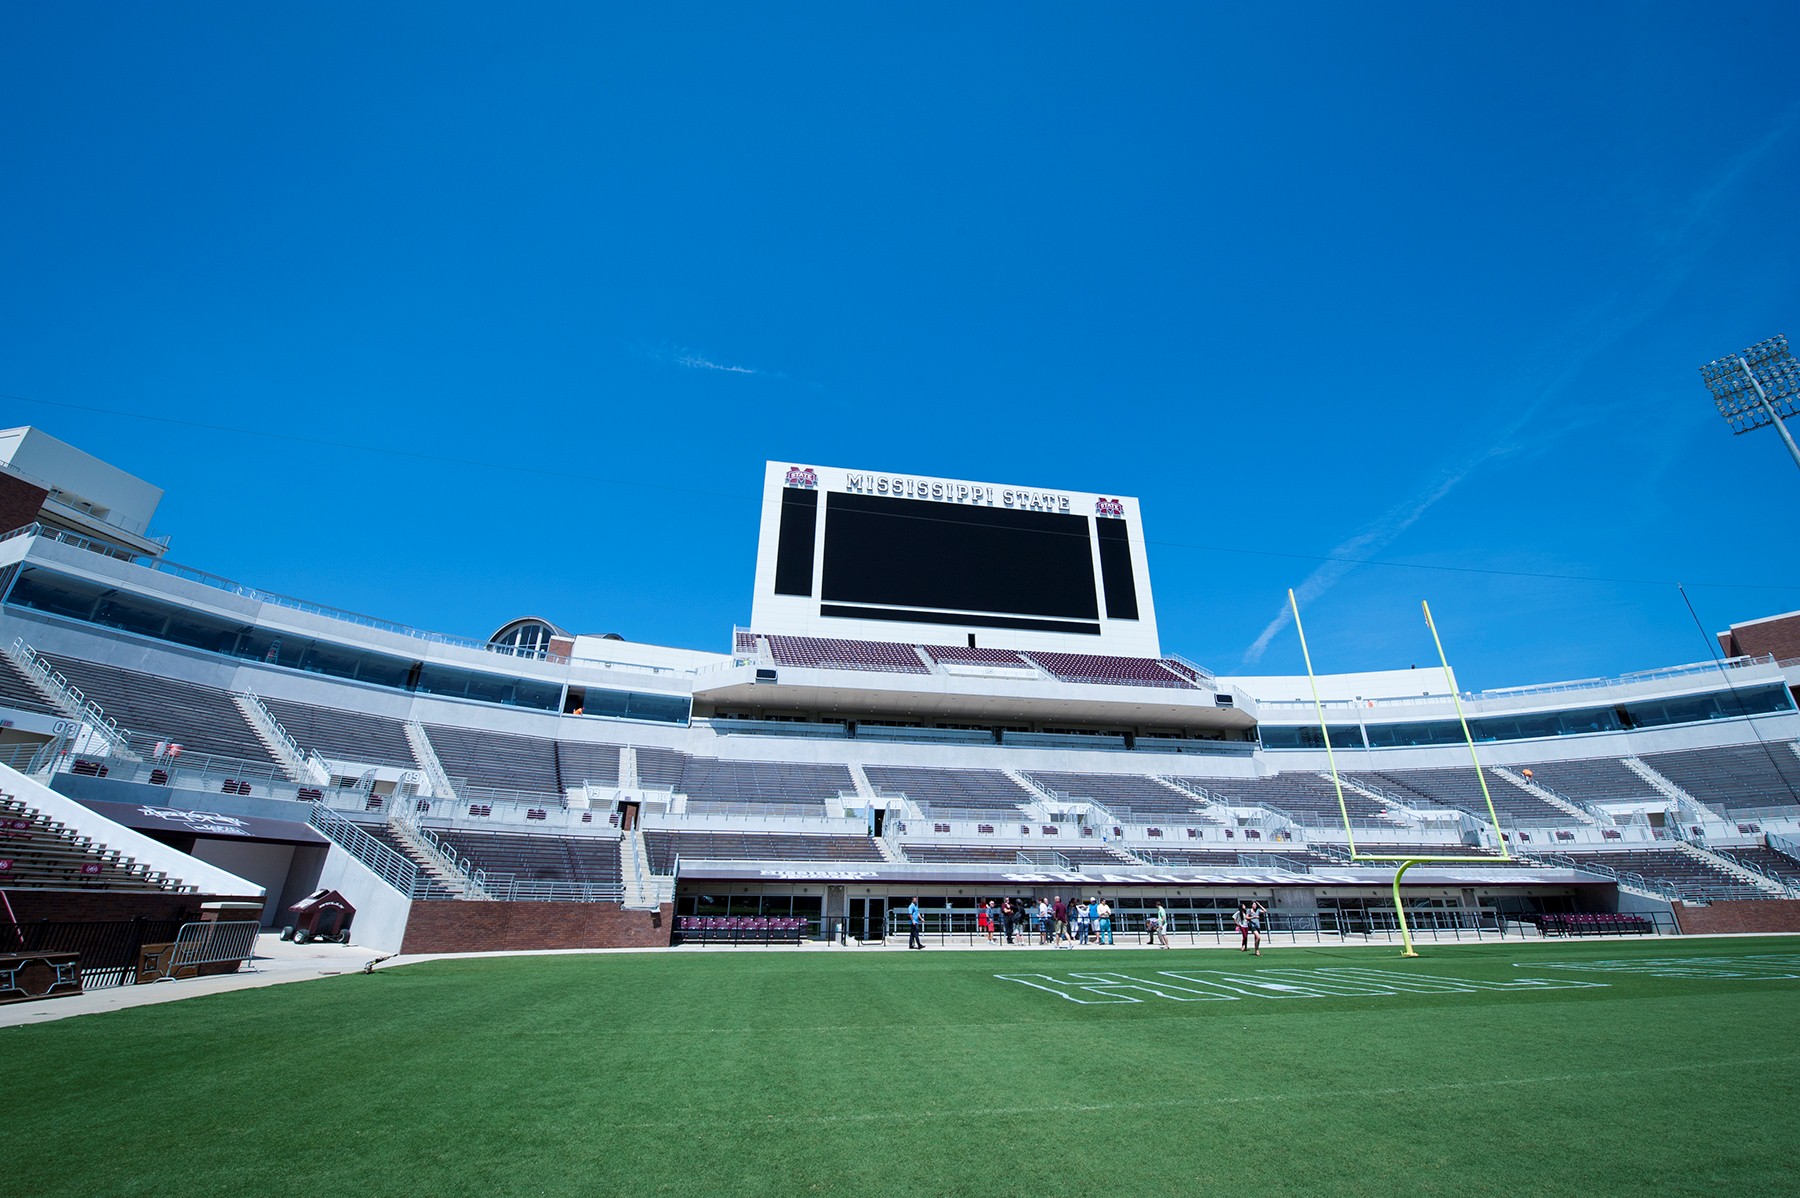 The new north end zone of Mississippi State's Davis Wade Stadium was built with a sustainable combination of cement developed by university-affiliated civil engineers.